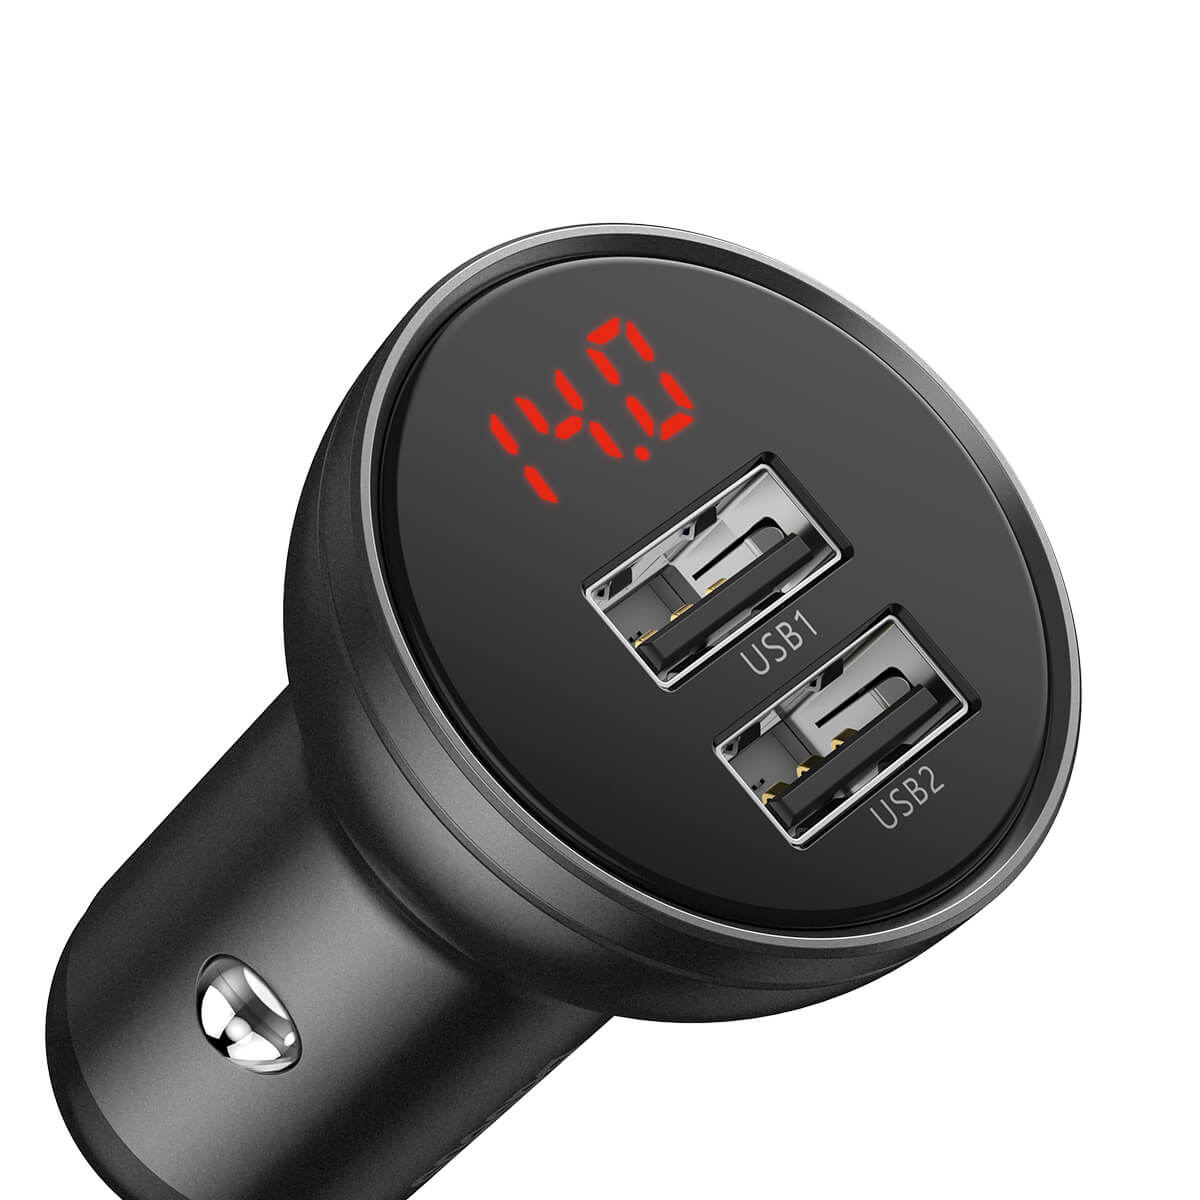 Baseus Car Charger Suit Digital Display Dual USB Multi Port 3-in-1 Cable USB 1.2M